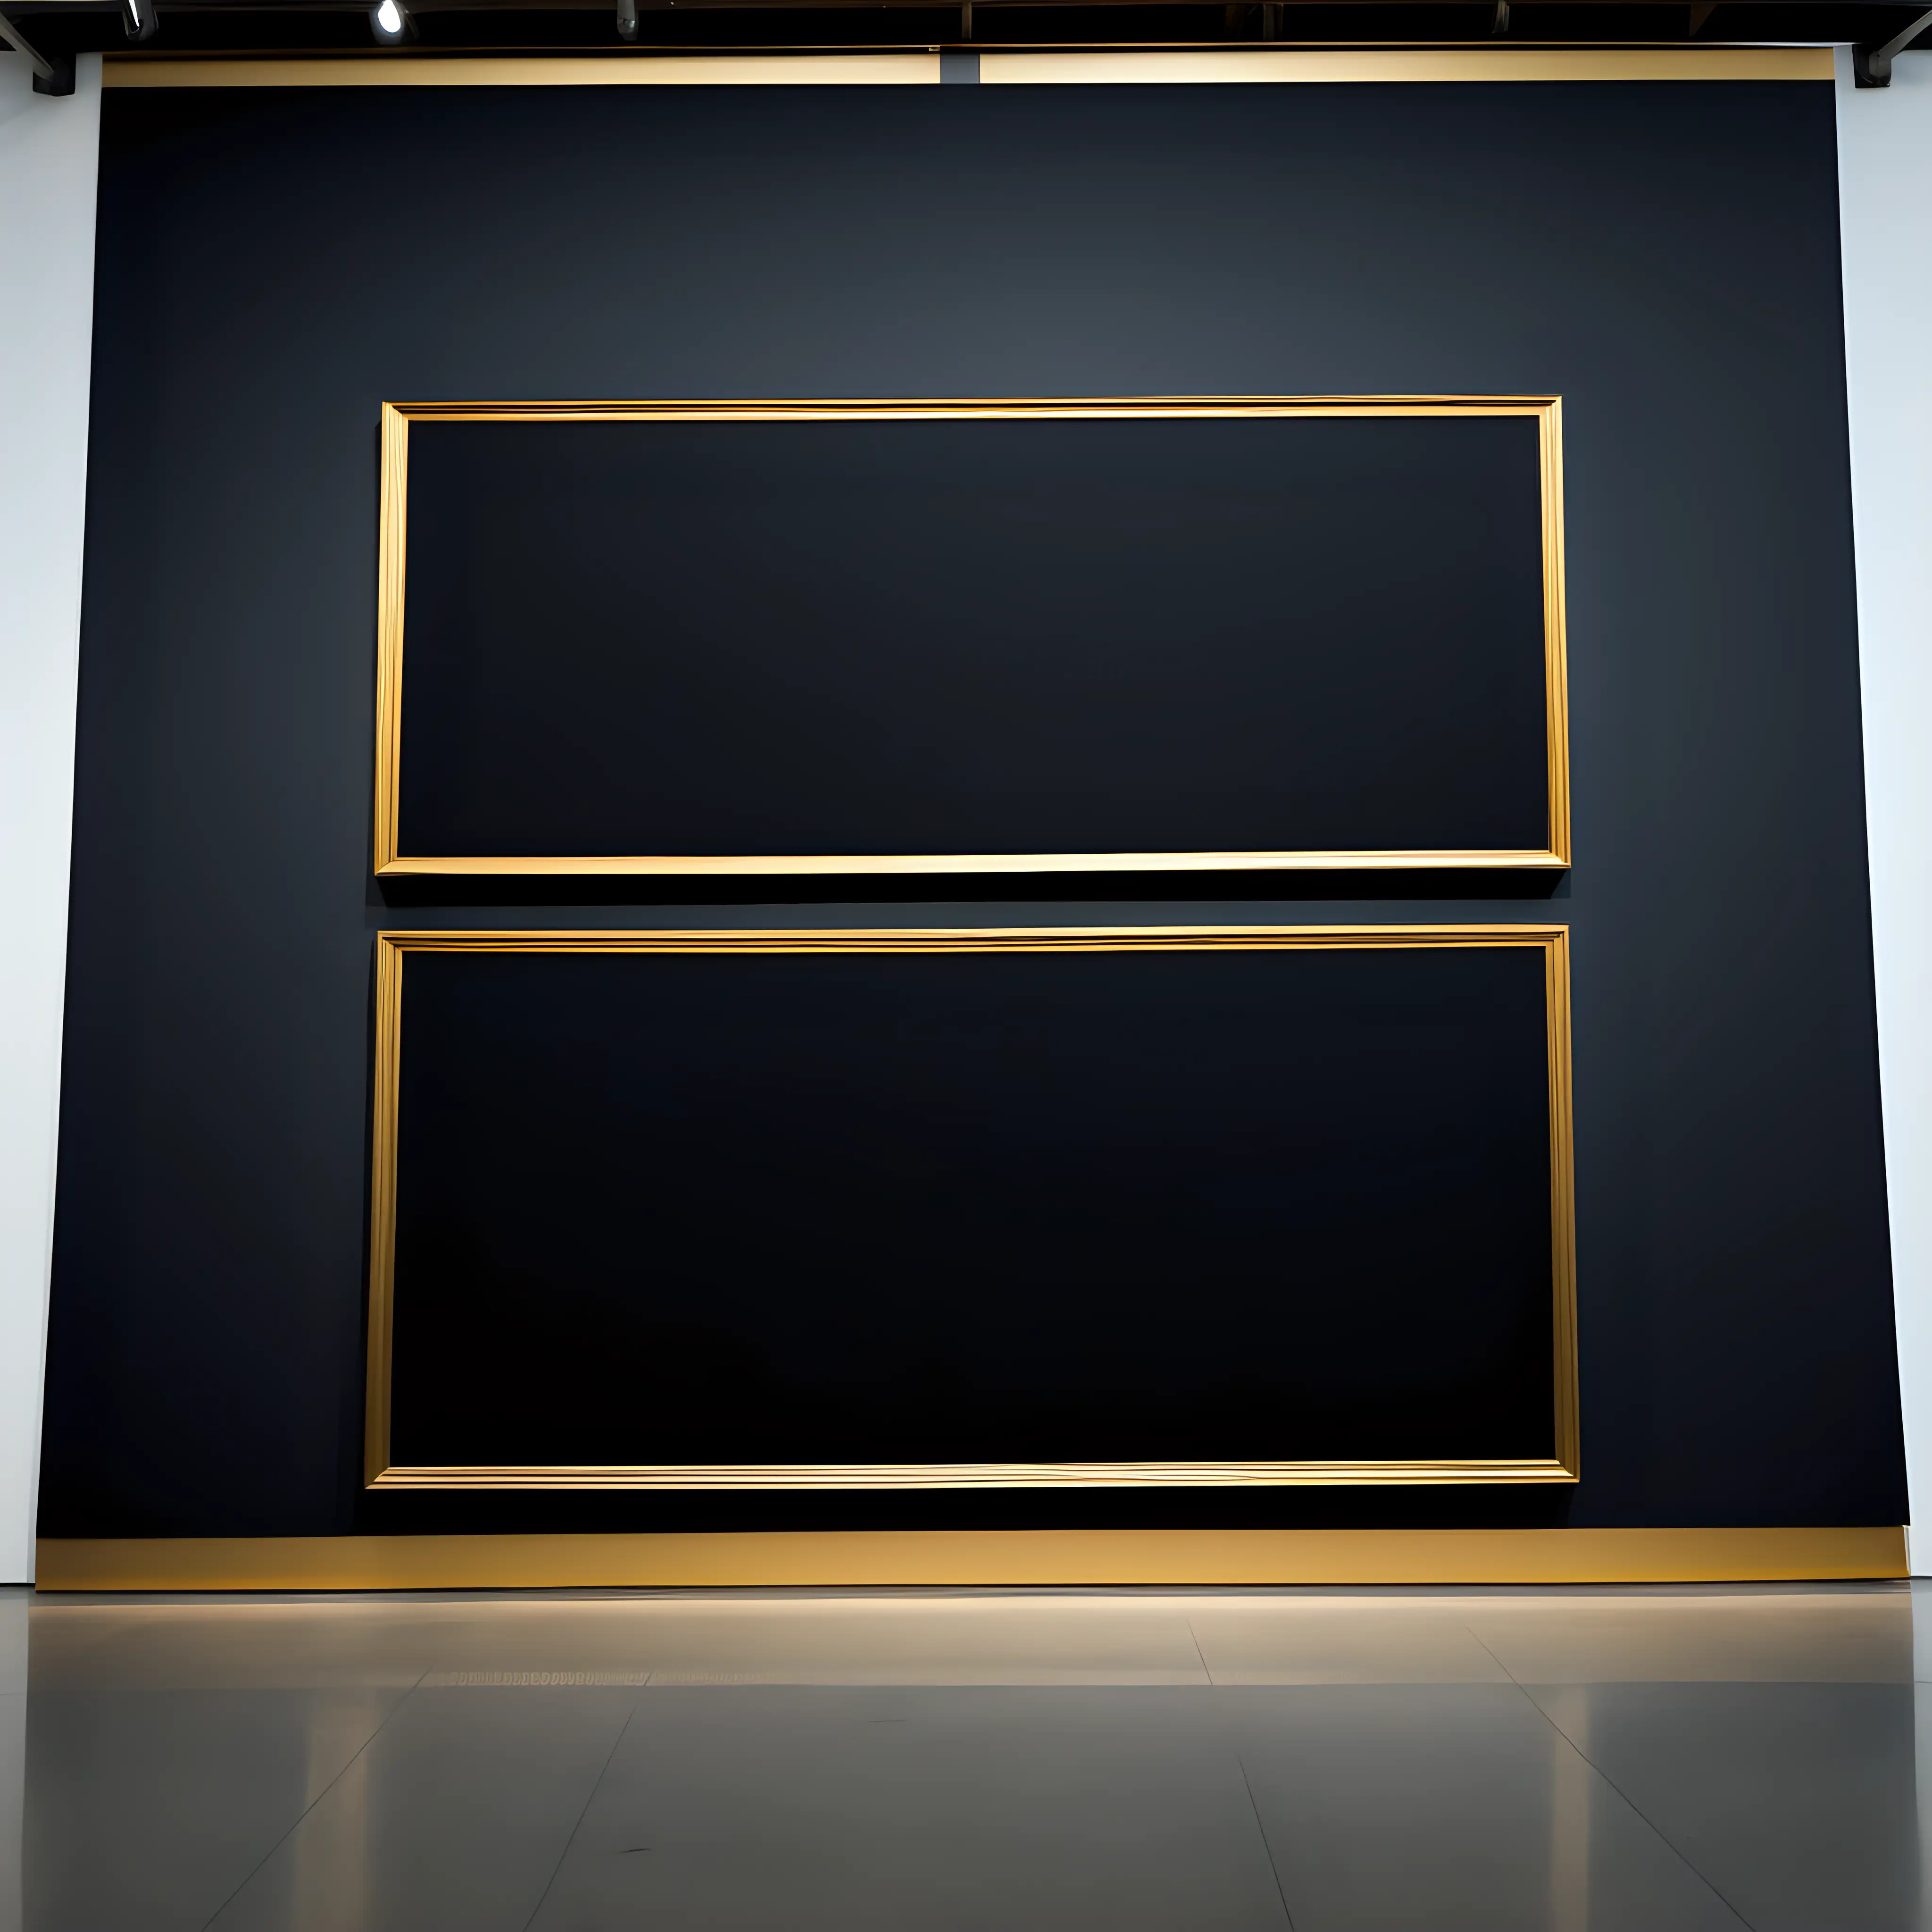 TWO GIANT HORIZONTAL GOLD FRAMED BLACK CANVASES ON GIANT MUSEUM WALL
